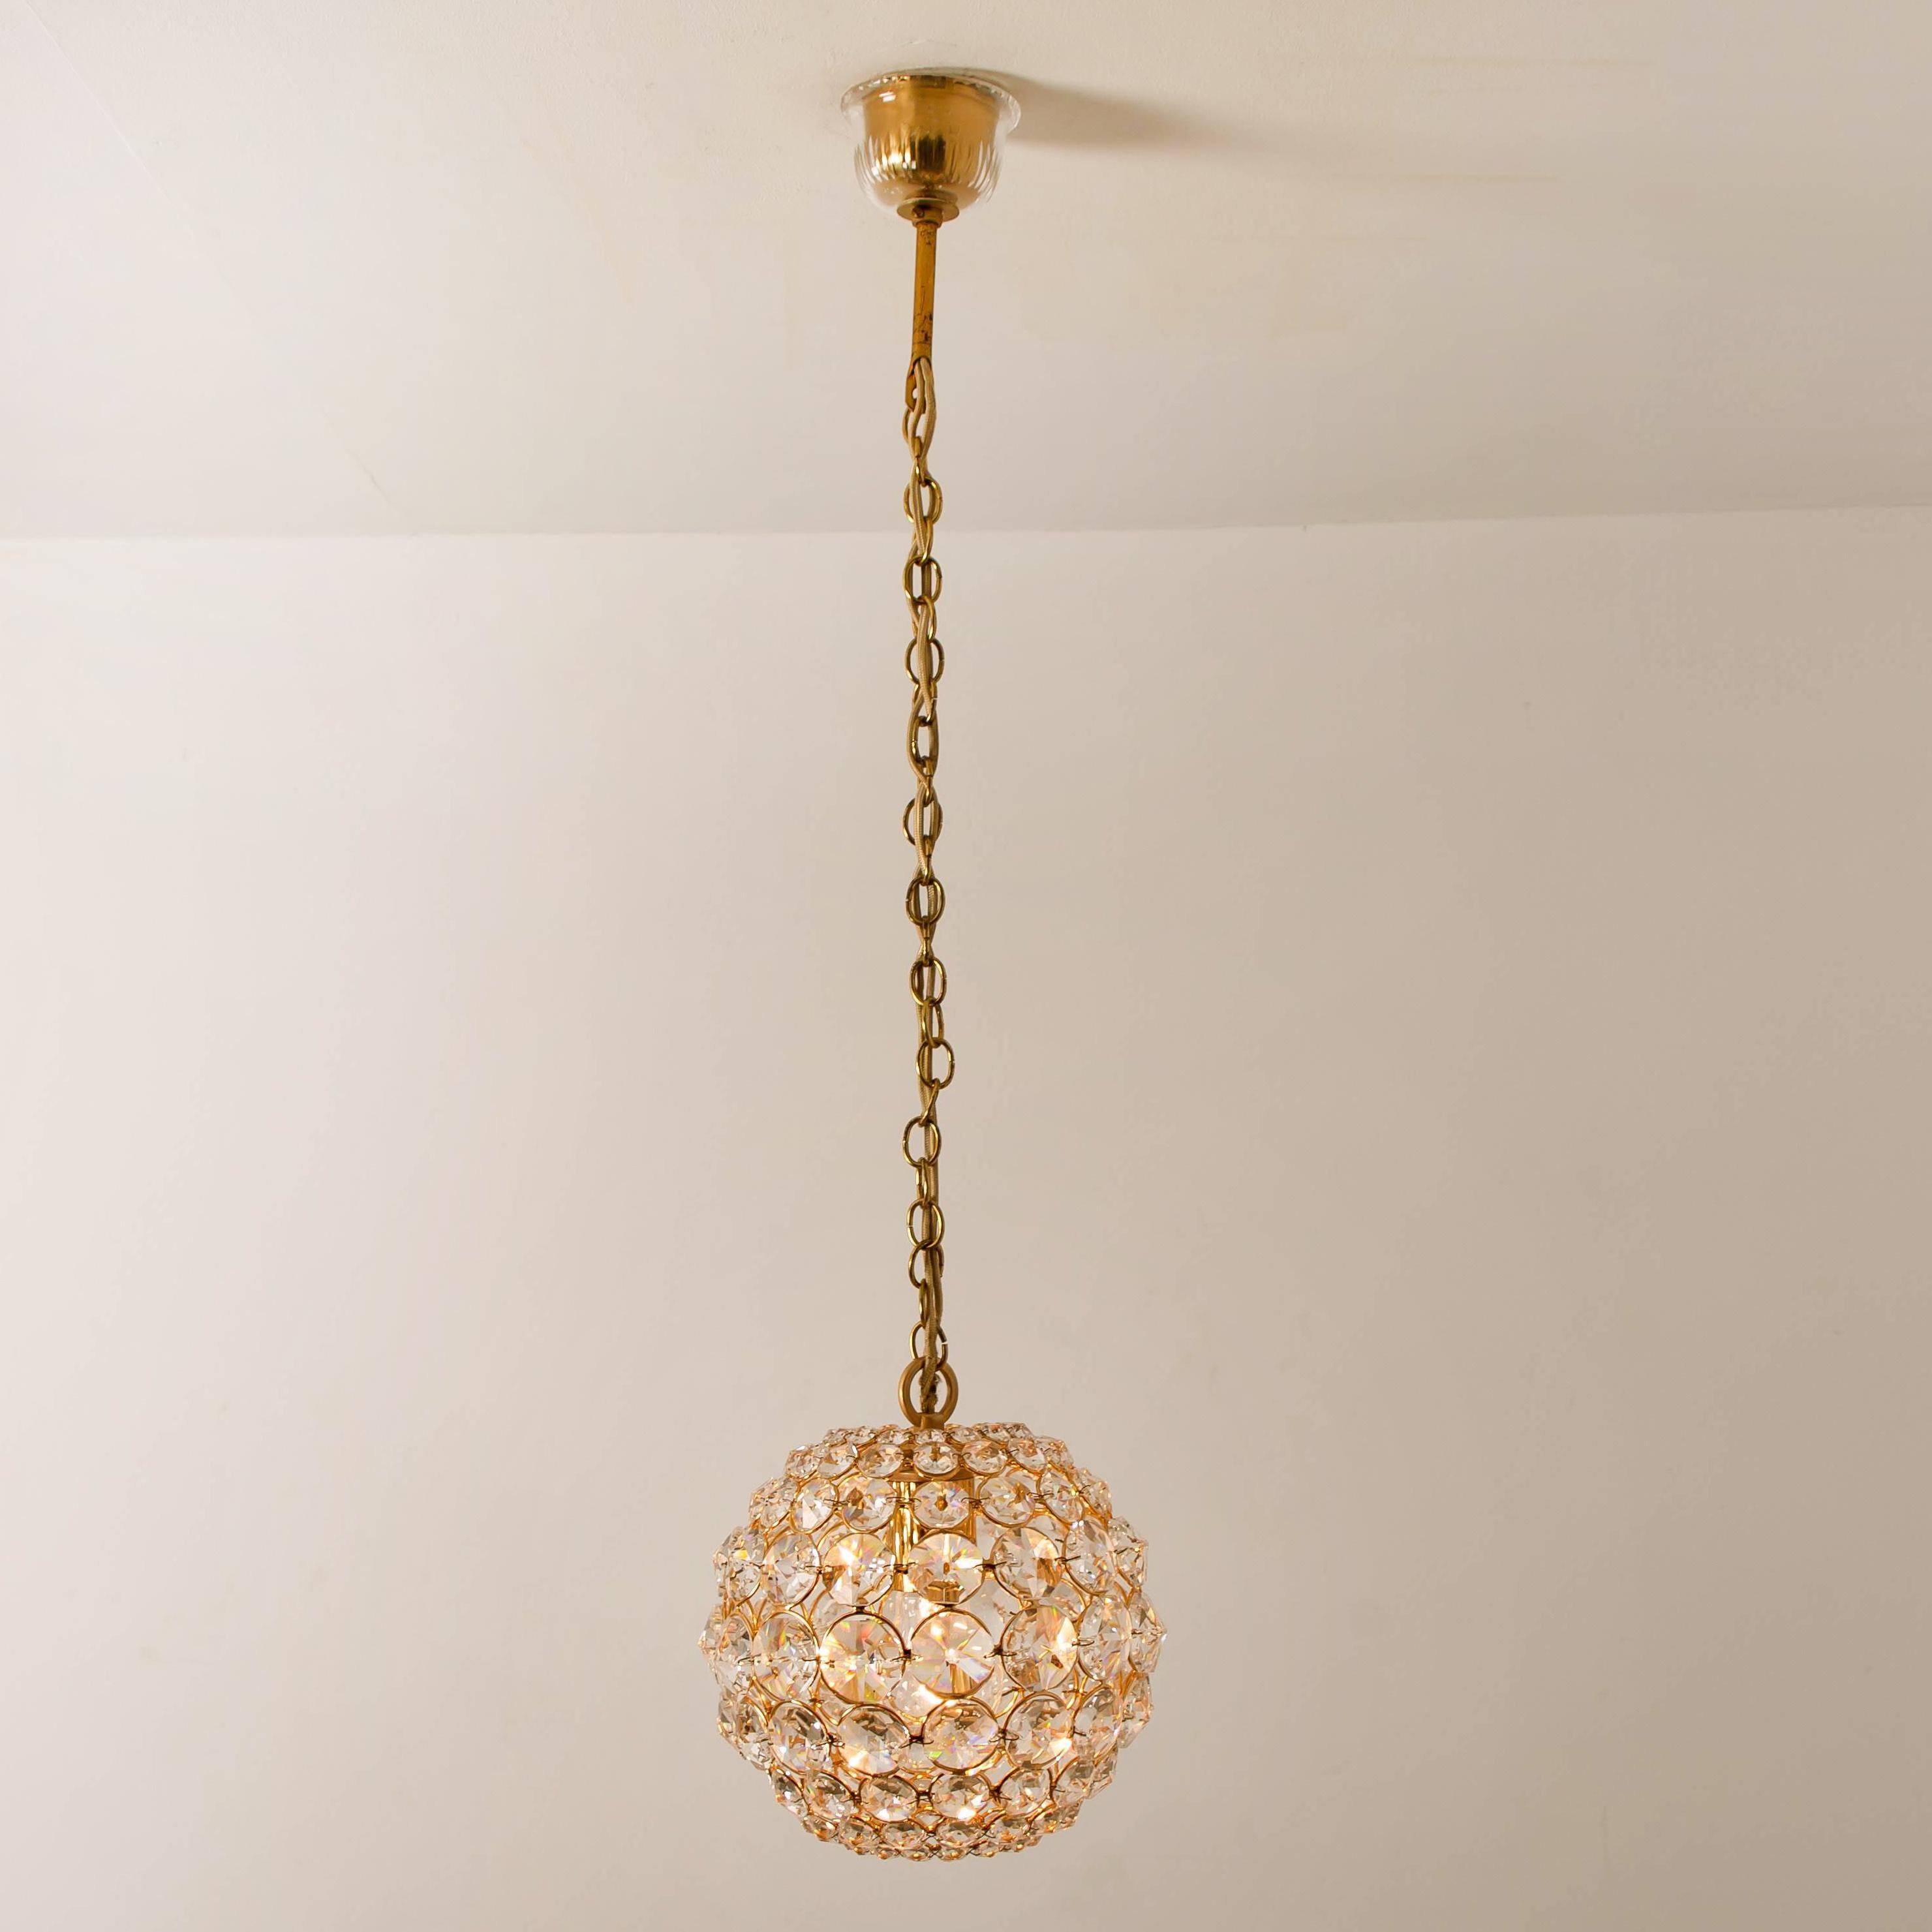 Italian Small Gold-Plated Brass and Crystal Pendant Lamp from Palwa, 1960s